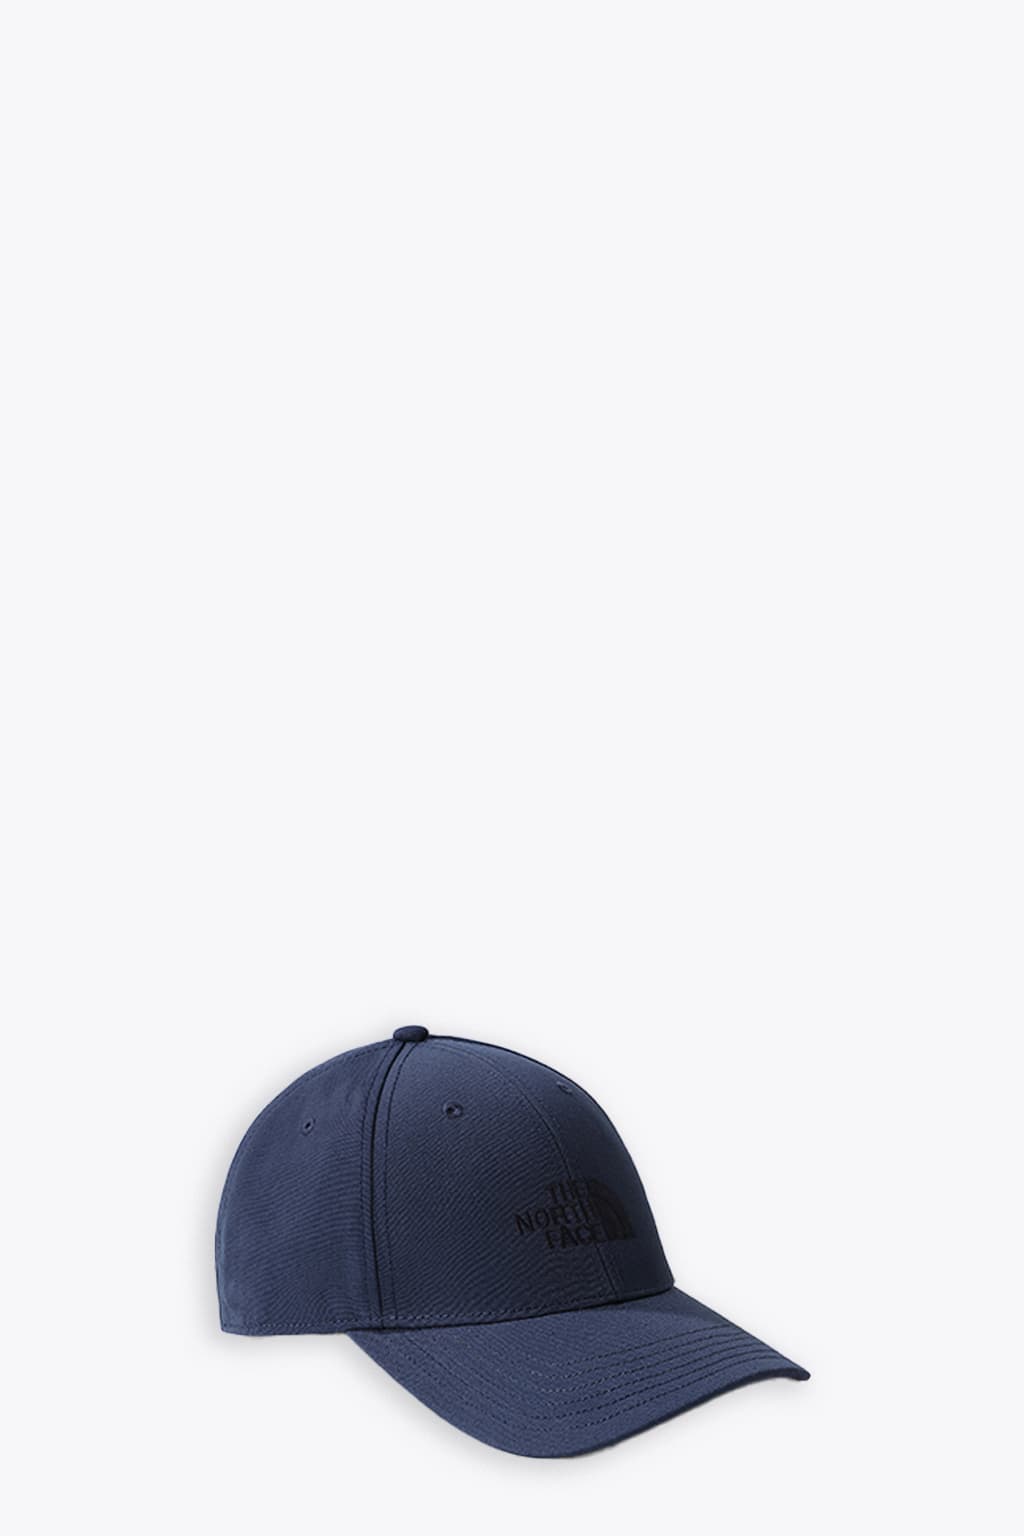 The Classic Logo Recycled Hat Face Cap 66 66 Classic With Hat - Recycled | Smart North Blue Closet Embroidery